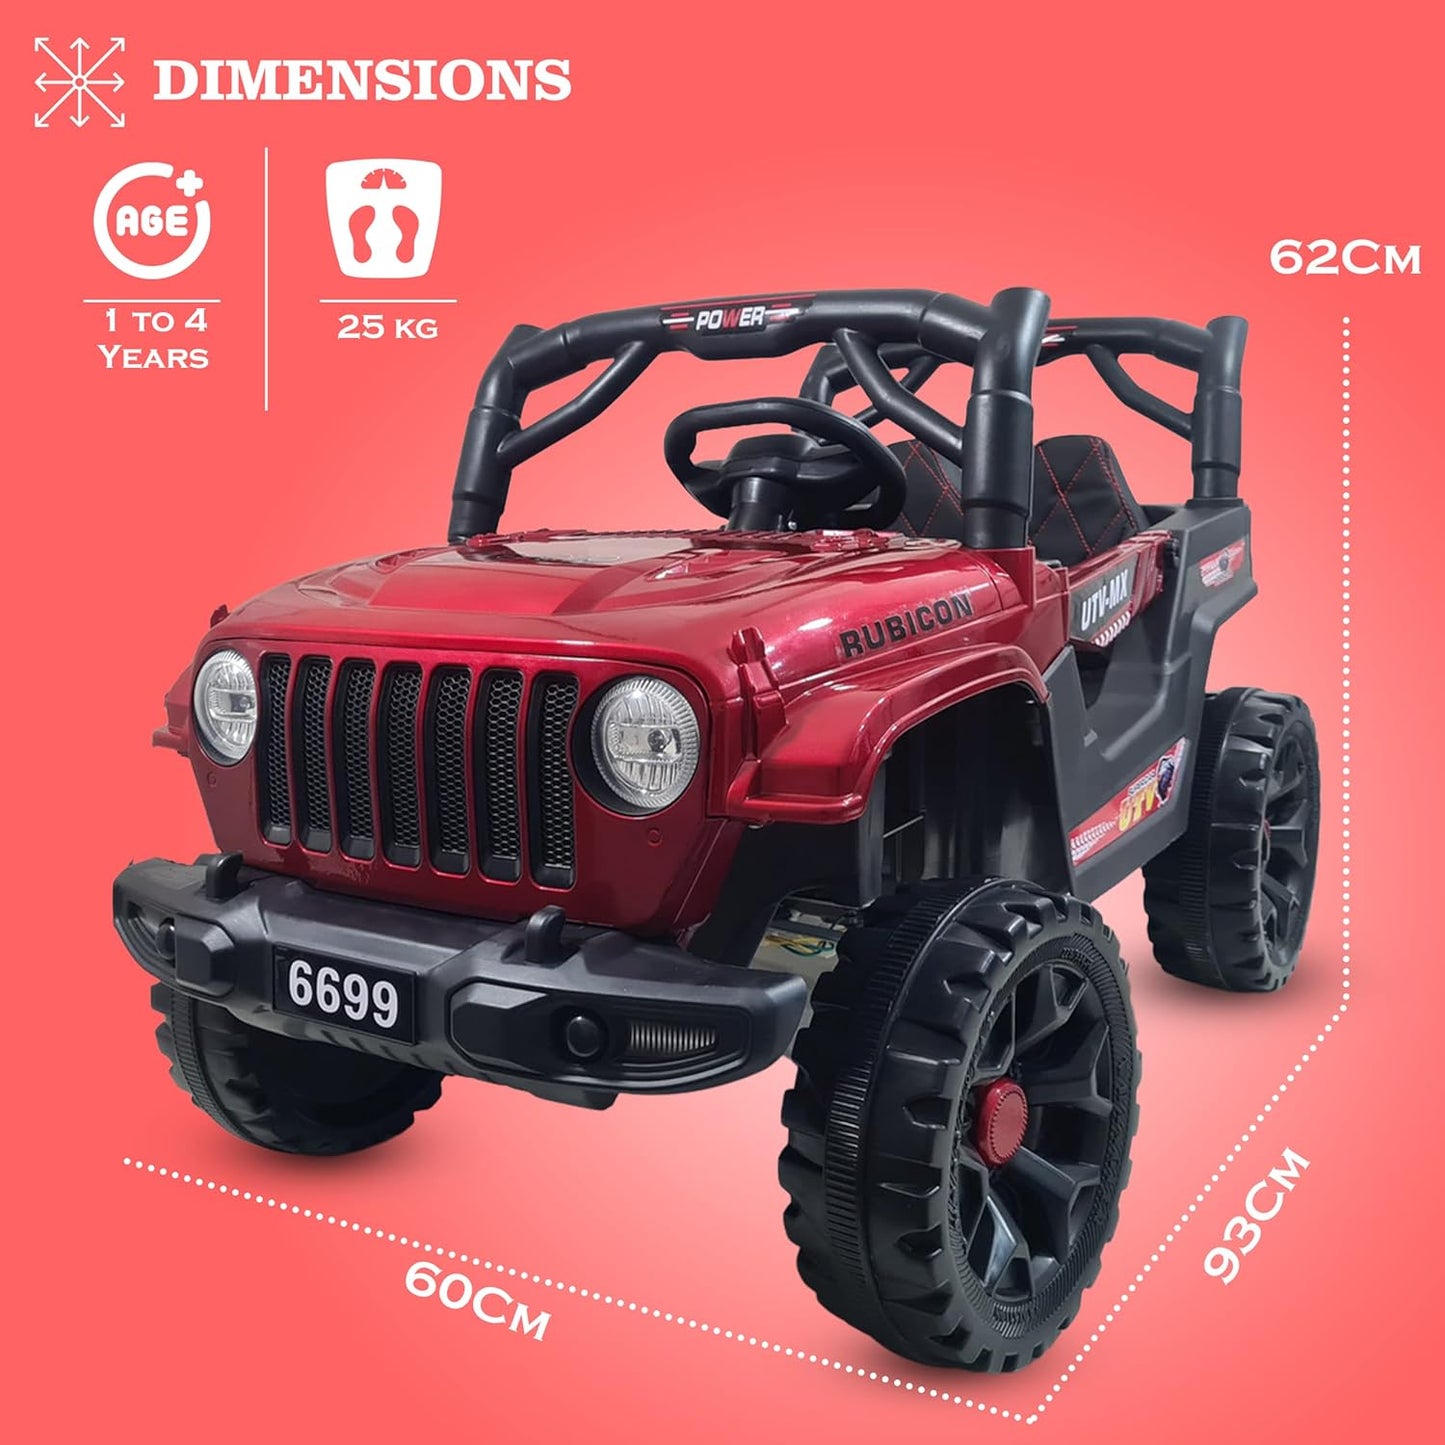 GettBoles 908 Electric Ride on Jeep for Kids with Music, Led Lights, Swing, Bluetooth Remote and 12V Battery Operated Car for1 to 4 Years Children to Drive (Metallic Red)